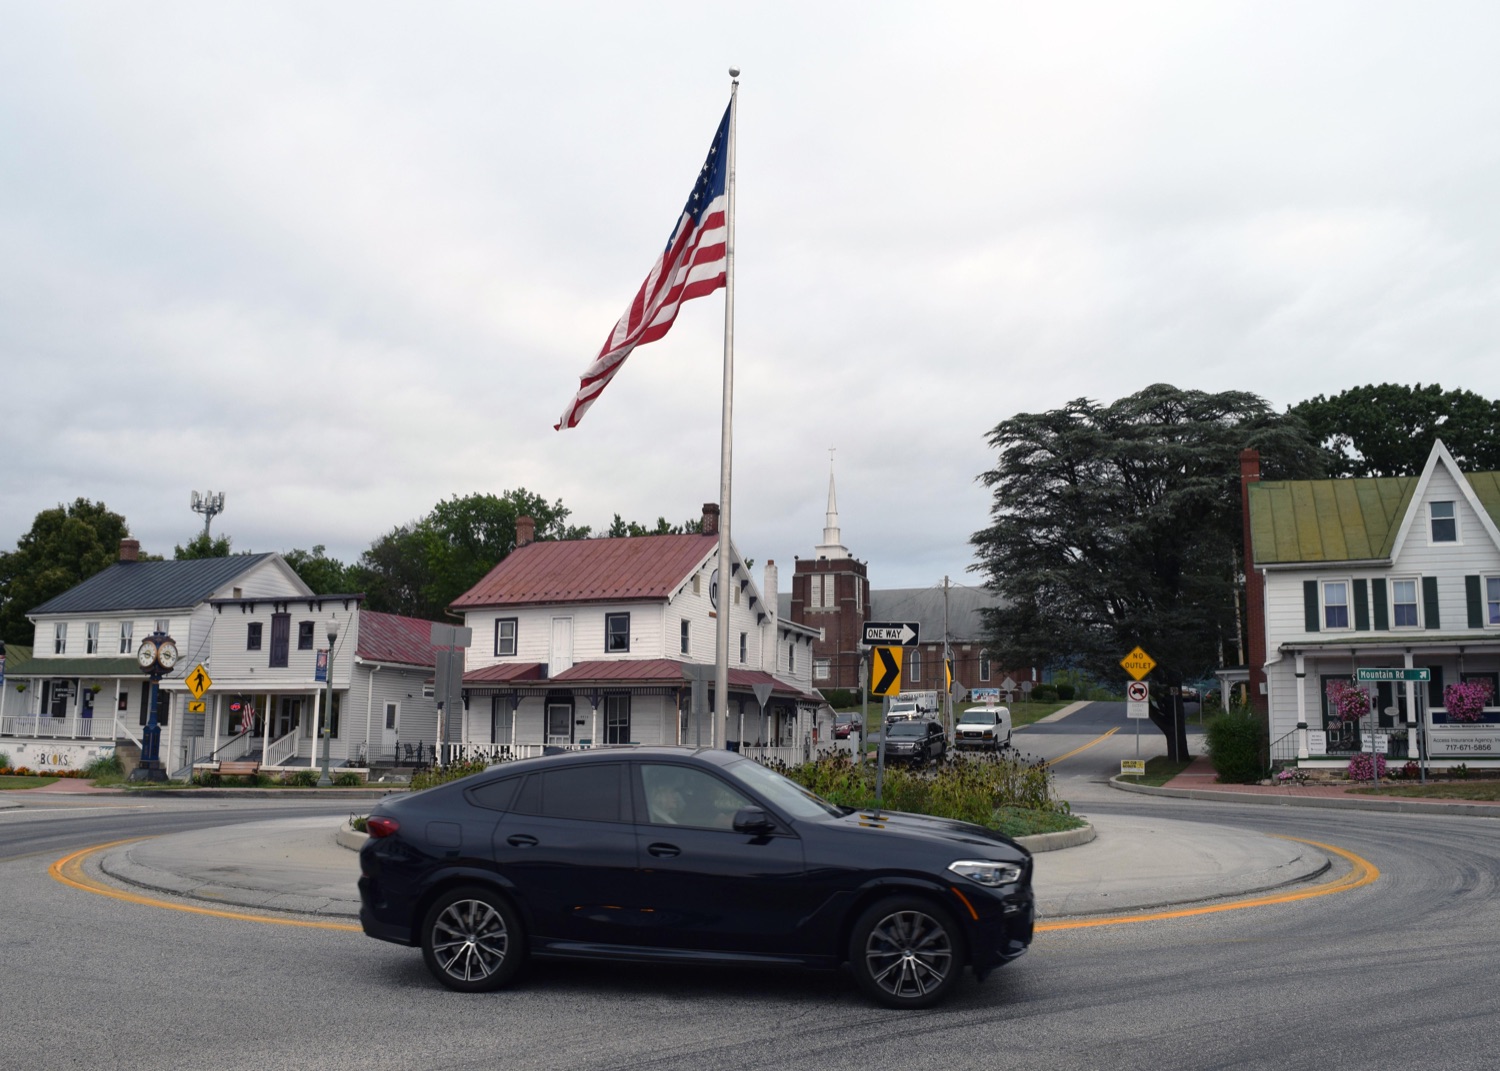 Route 39 (Linglestown Road) and Route 3019 (Mountain Road)<br><a href="https://filesource.amperwave.net/commonwealthofpa/photo/22209_dot_roundabout_photo_8.jpg" target="_blank">⇣ Download Photo</a>